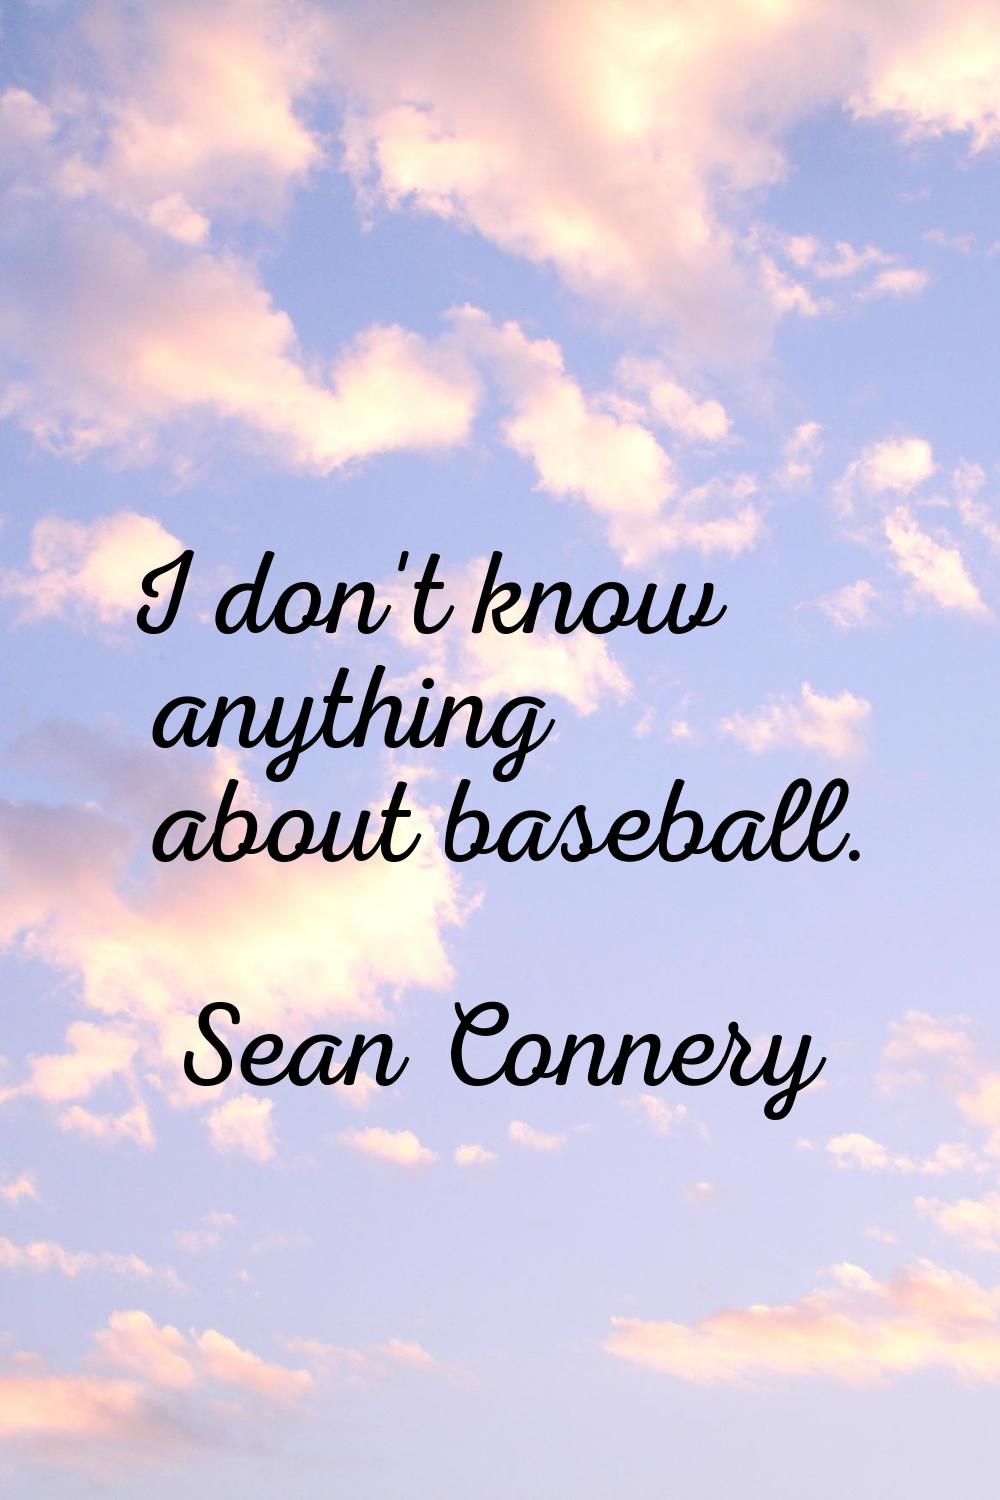 I don't know anything about baseball.